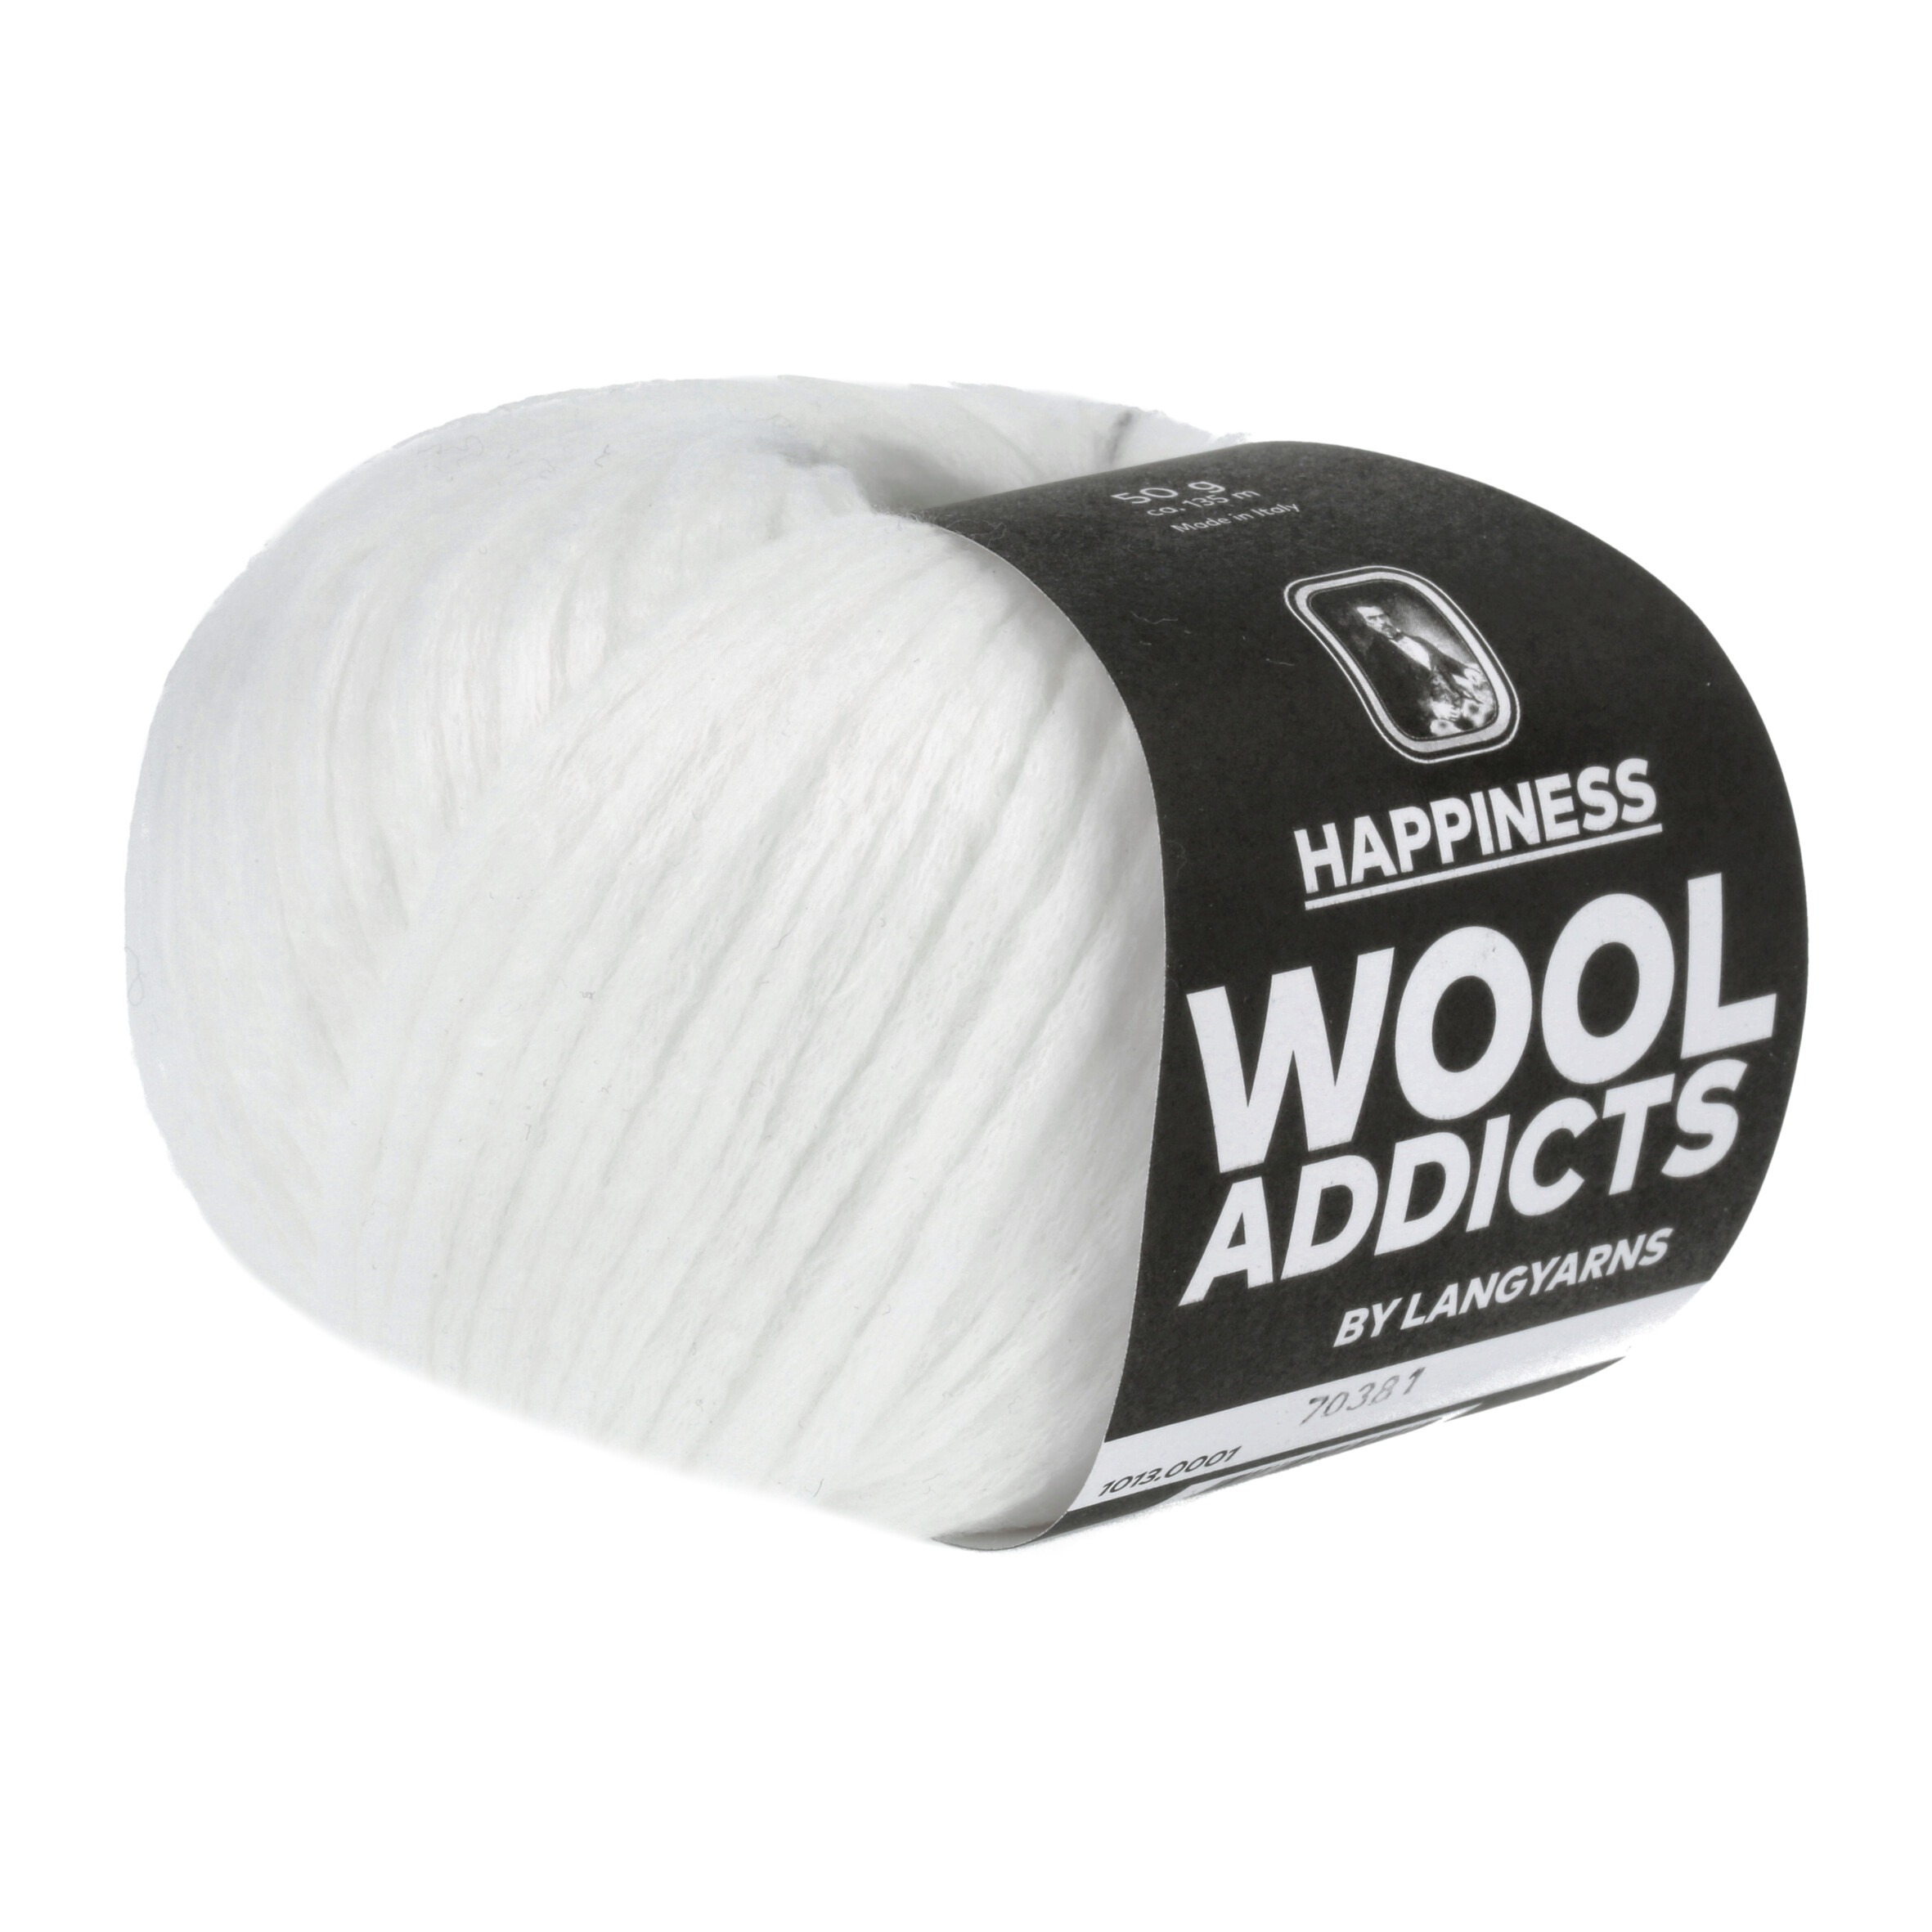 WOOLADDICTS Happiness 001 weiss